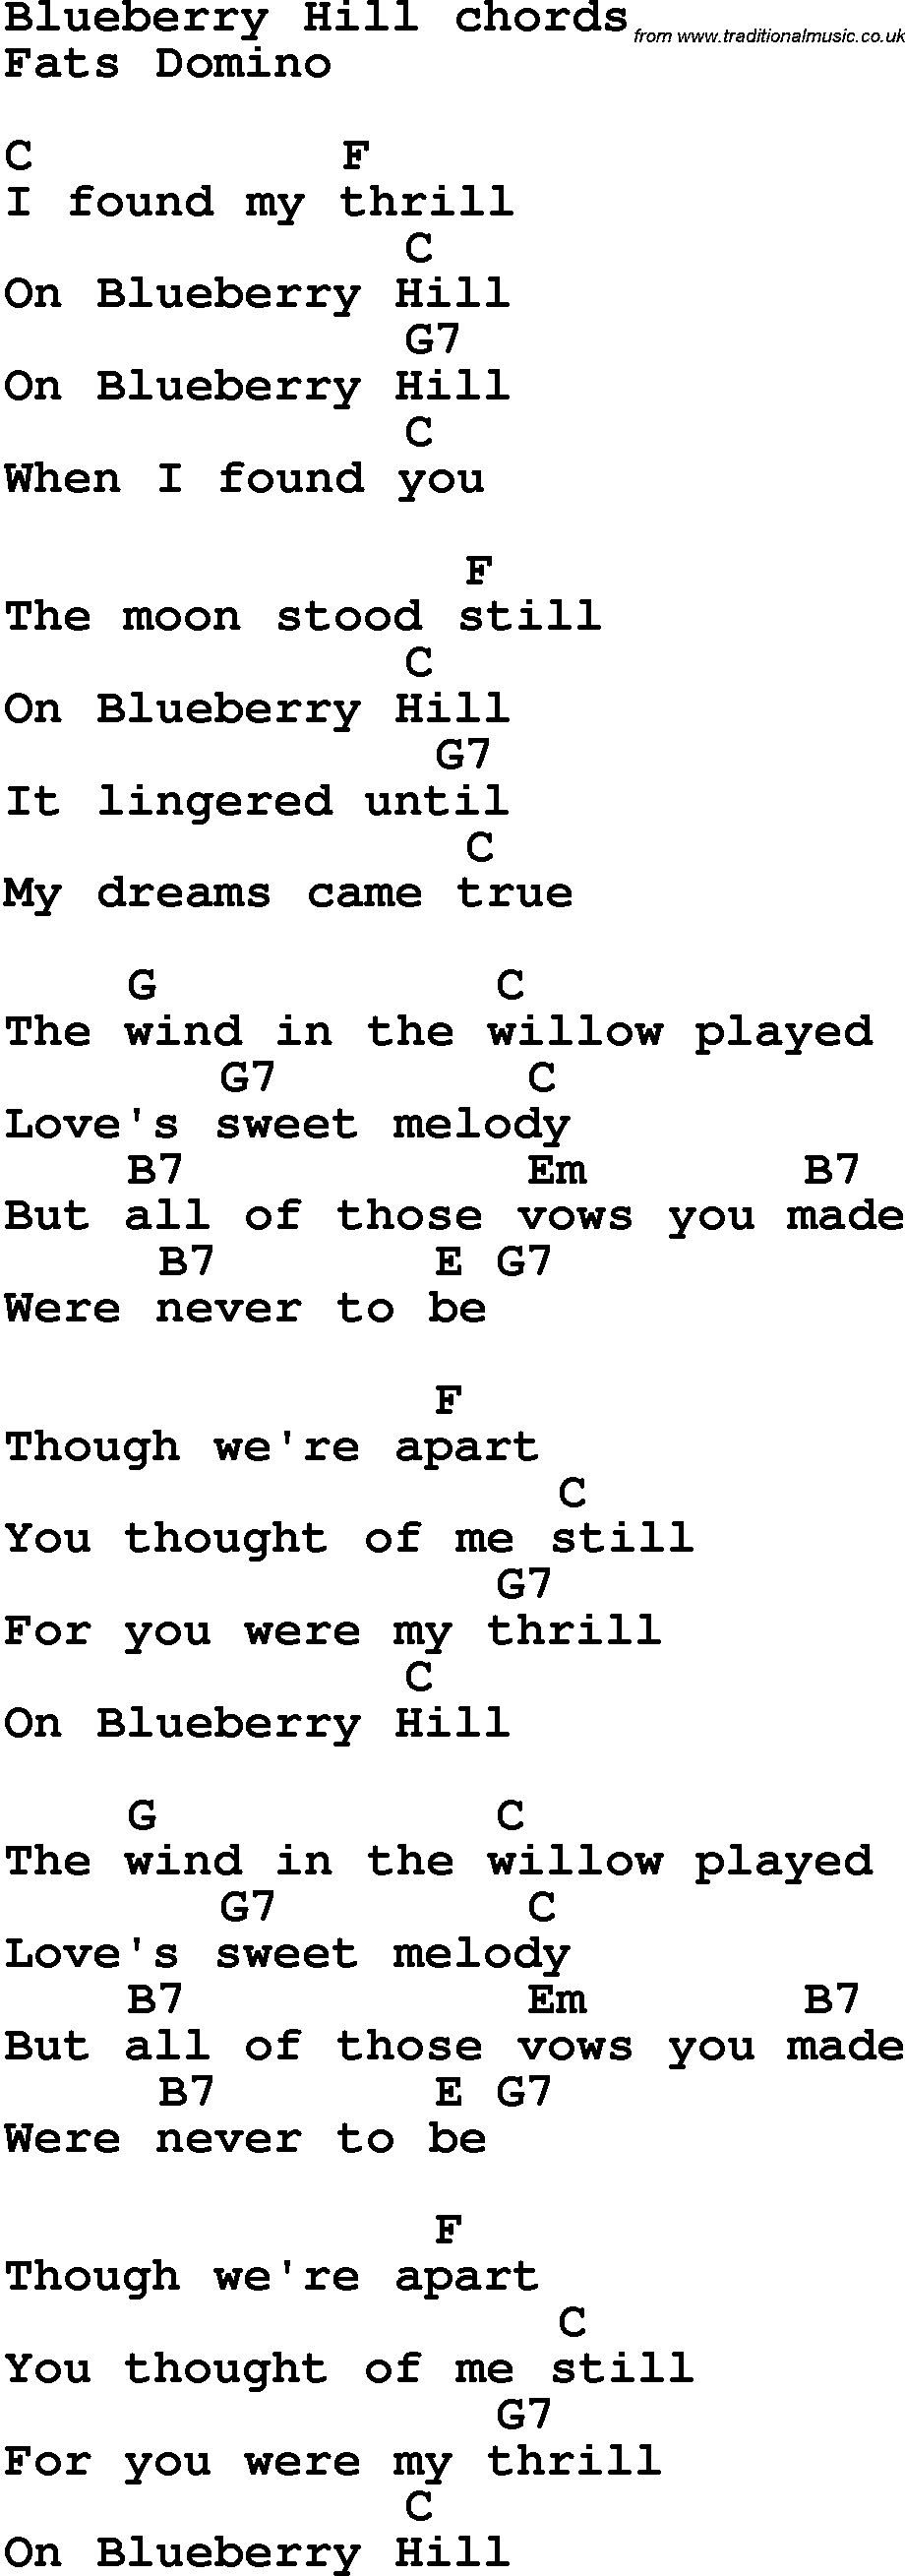 Song Lyrics with guitar chords for Blueberry Hill